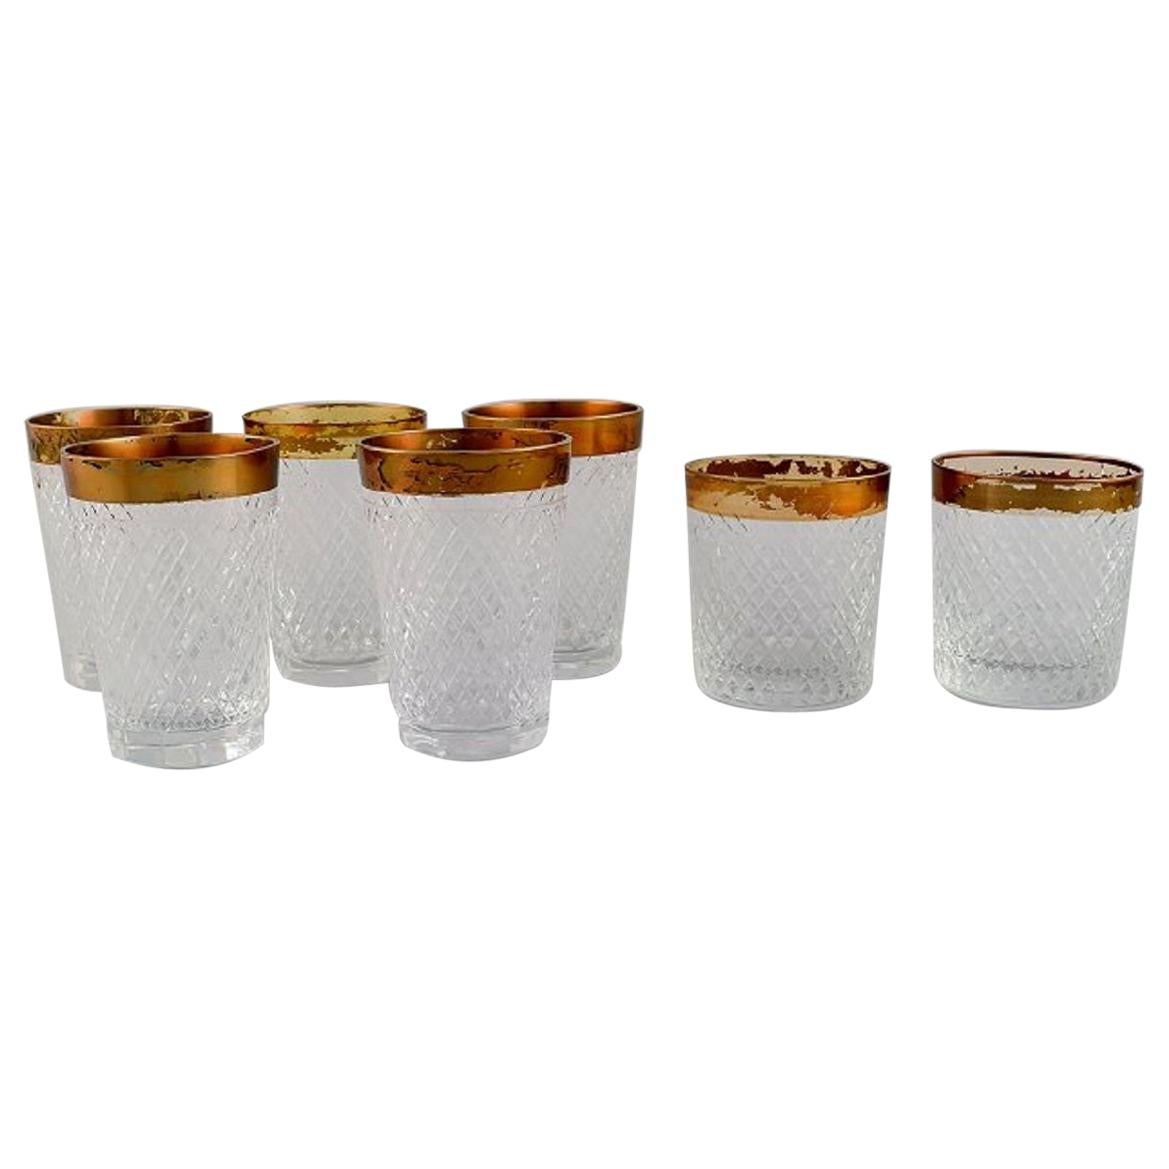 Seven Drinking Glasses in Mouth-Blown Crystal Glass with Gold Edge, 1930's